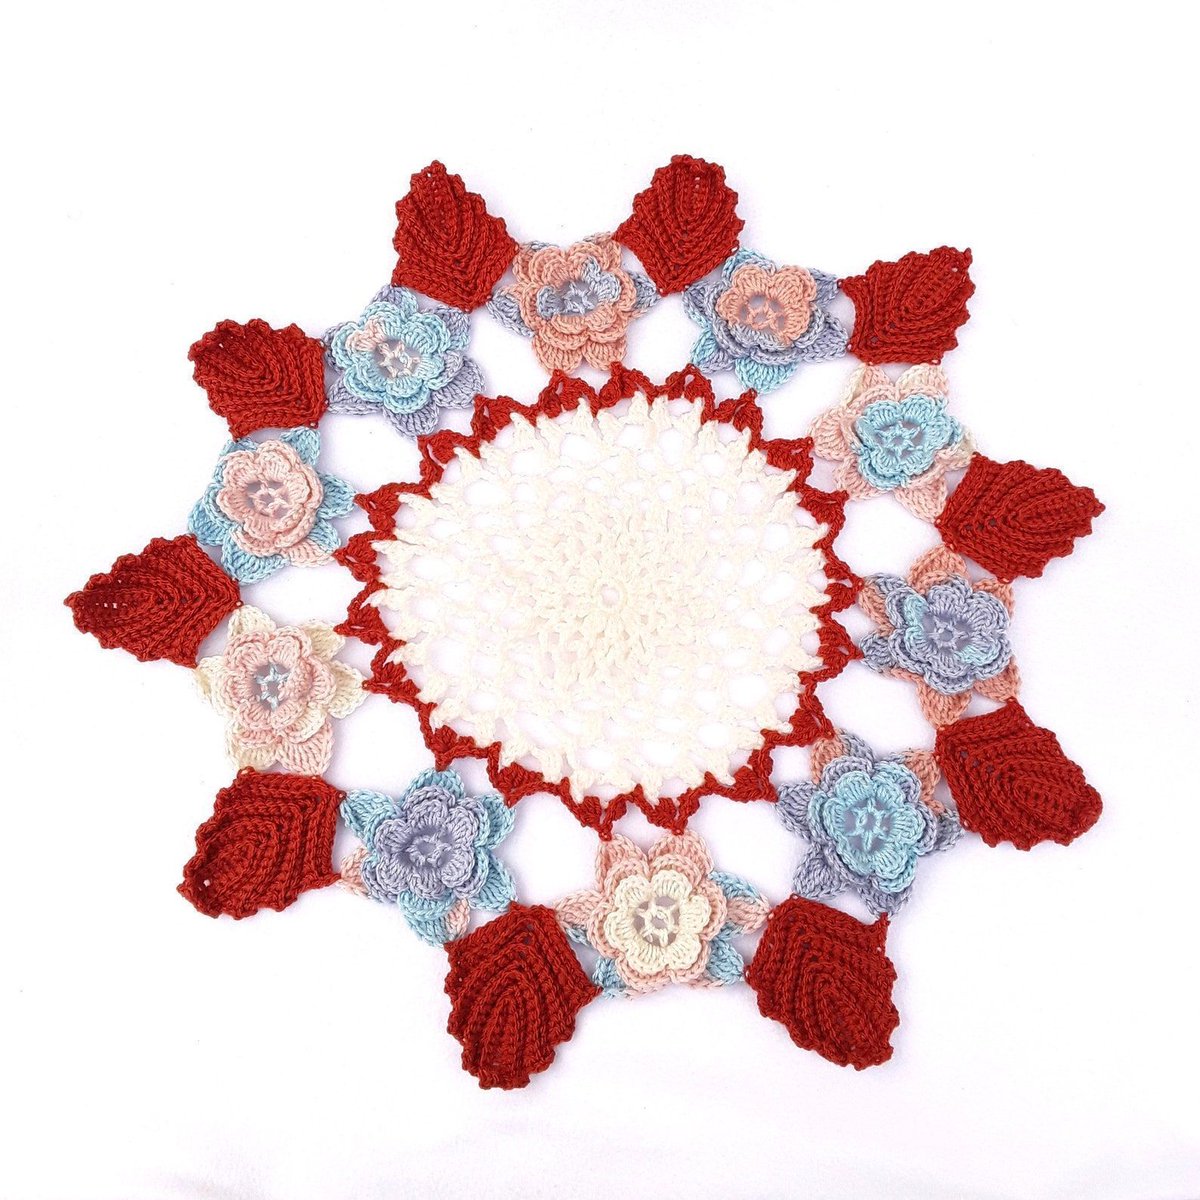 #MHHSBD 

𝗩𝗶𝗻𝘁𝗮𝗴𝗲 𝗱𝗲𝘀𝗶𝗴𝗻 𝗱𝗼𝗶𝗹𝘆 

Add a touch of vintage charm to your home decor with this autumnal crocheted doily. Handmade from a 1940's vintage pattern, it's the perfect accent piece for any room. 

knittingtopia.etsy.com/listing/167996…